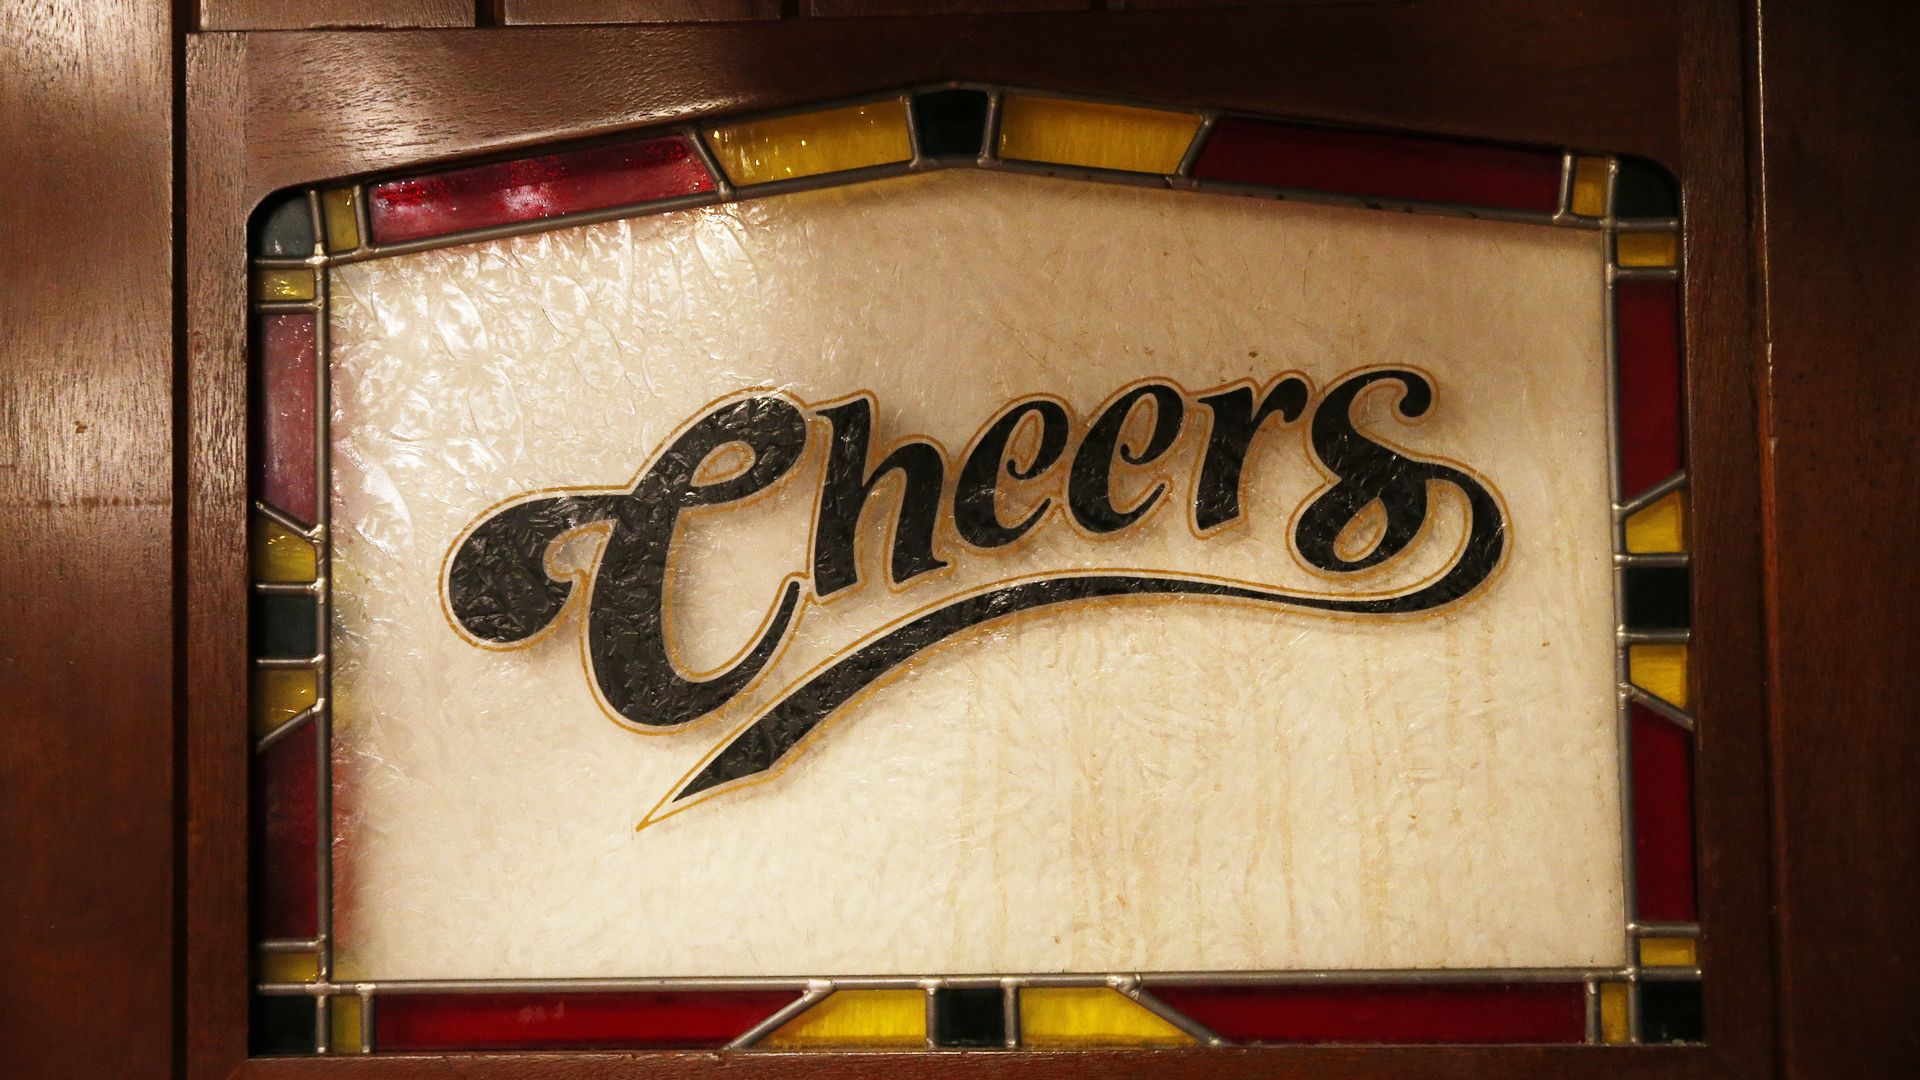 A Cheers door is one of the many items that are up for auction at Cheers Bar in Faneuil Hall in Boston on Oct. 5, 2020.